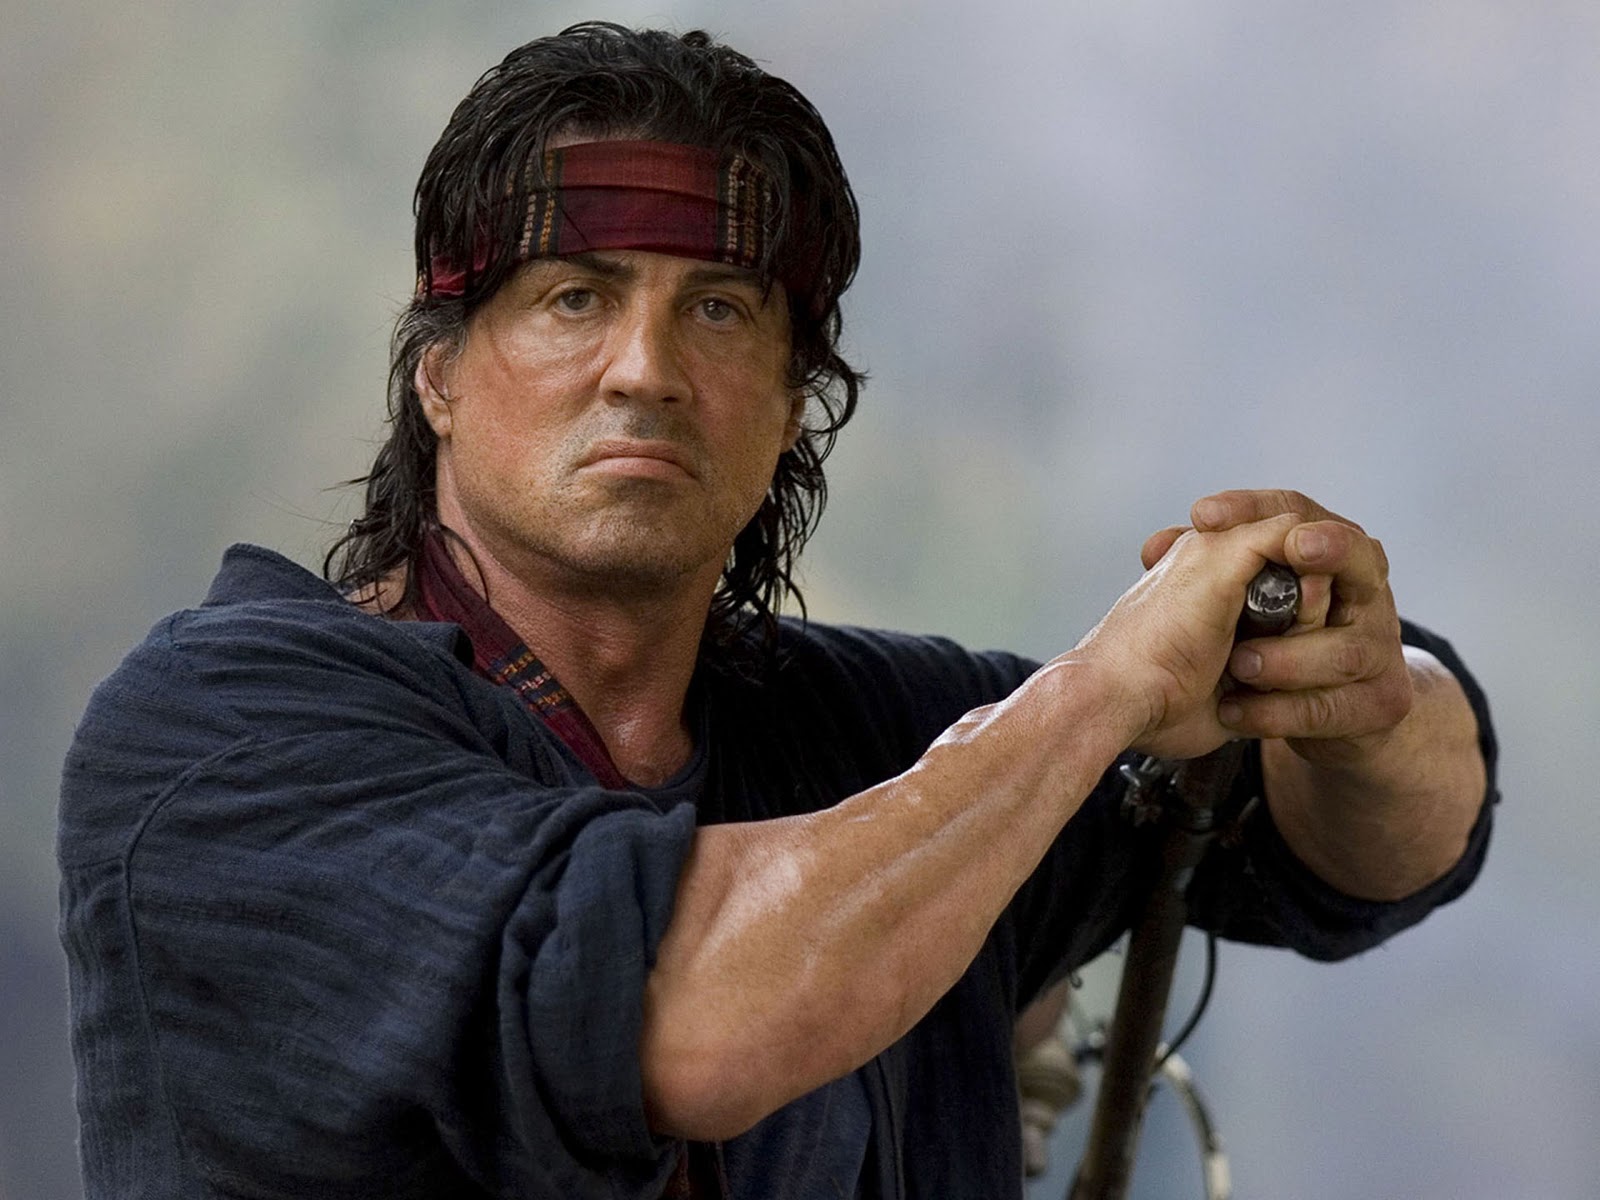 Actor-pictures-sylvester-stallone-wallpapers-hd-sylvester+stallone-wallpaper-photos-7.jpg